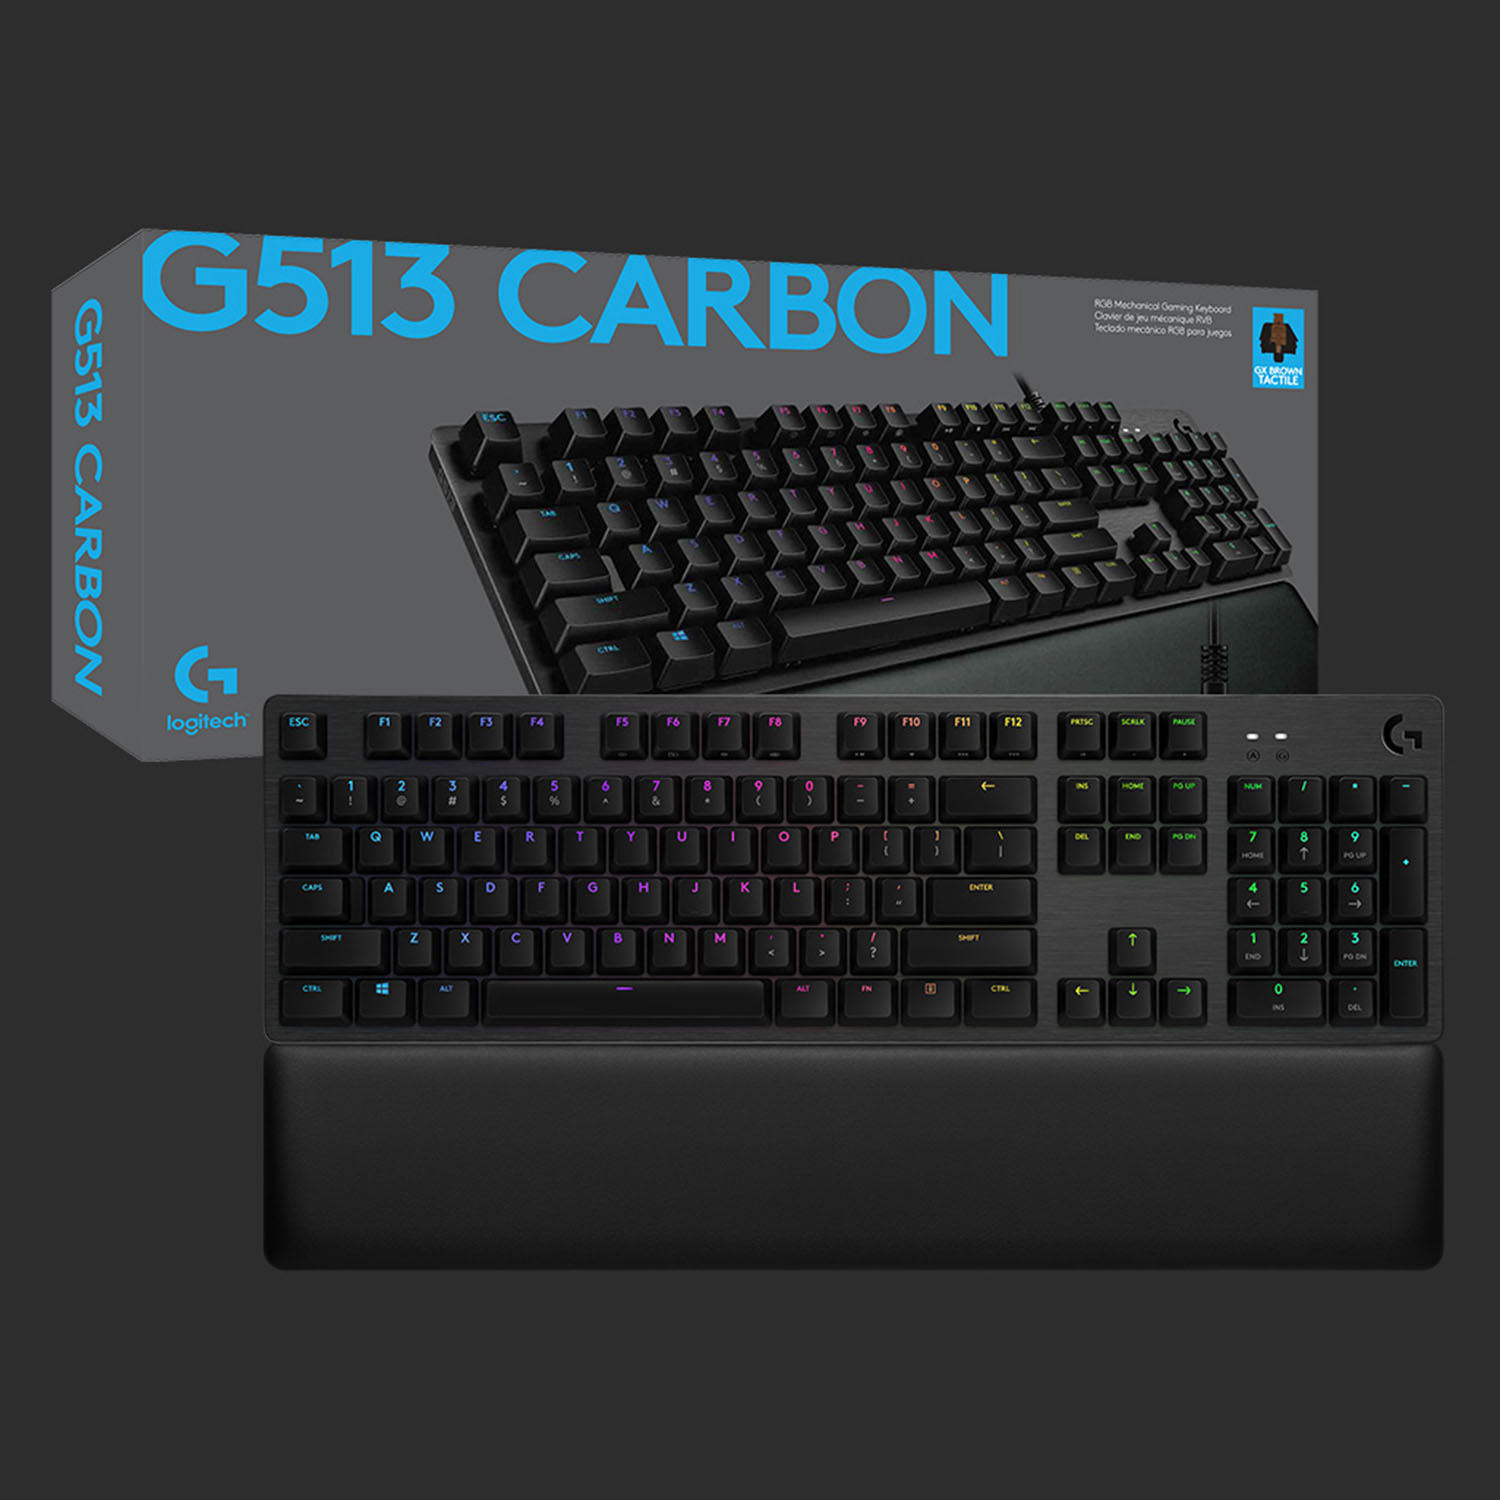 Logitech G512 CARBON LIGHTSYNC RGB Mechanical Gaming Keyboard with GX Brown  switches and USB passthrough - Tactile